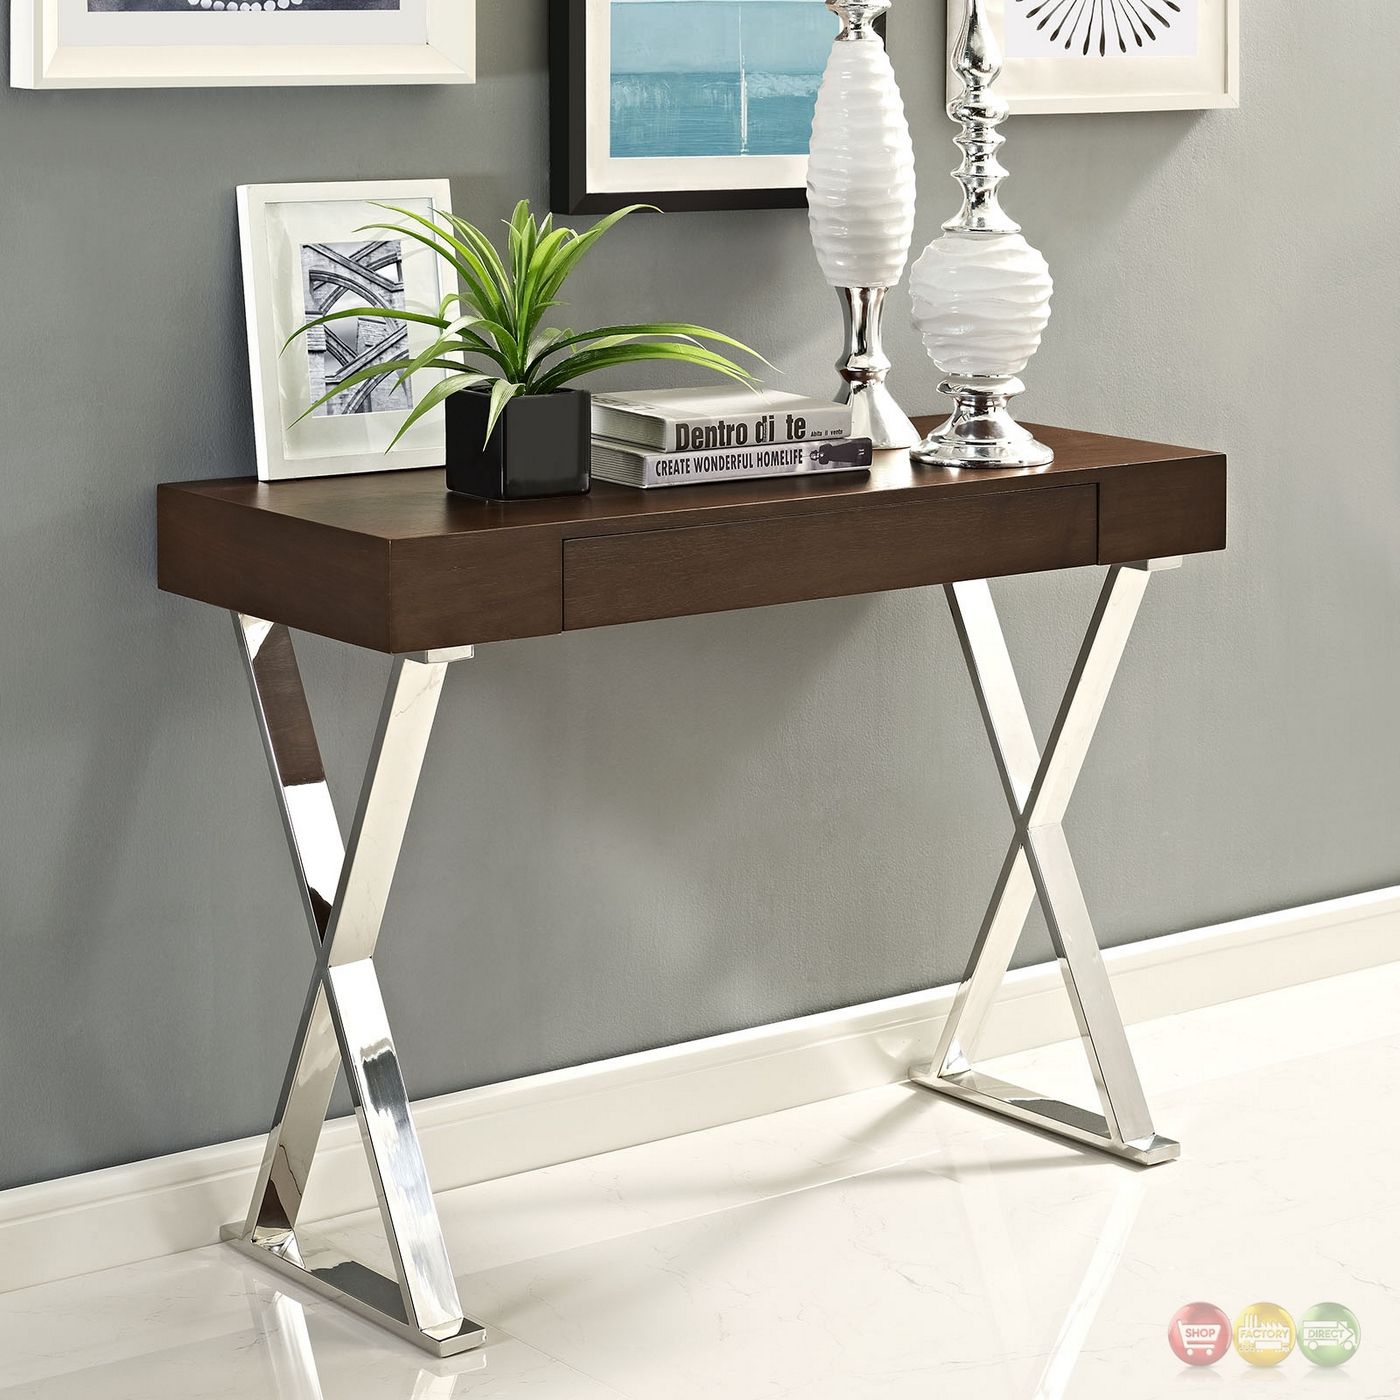 Sector Modernistic Console Table With High Gloss Top & Chrome Base, Brown Intended For Square High Gloss Console Tables (Gallery 20 of 20)